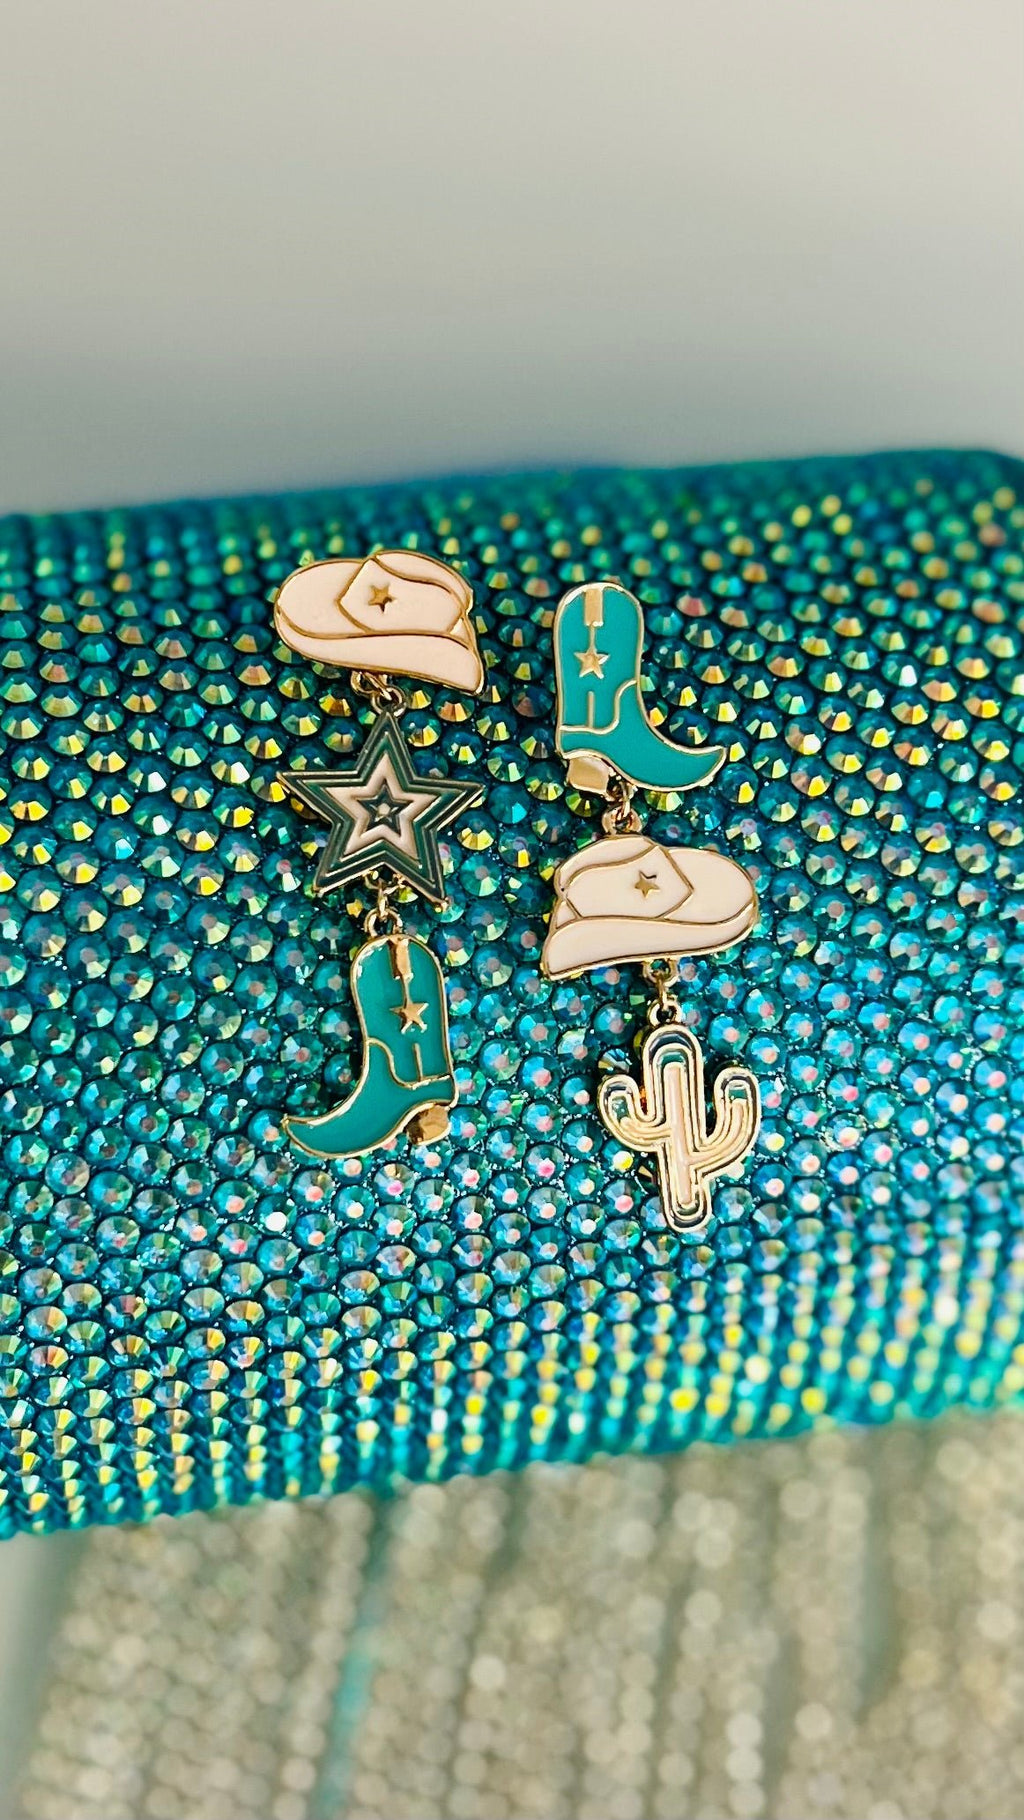 Add some southwestern flavor to your look with these eye-catching Dangling Western Turquoise Earrings. These 'statement makers' feature an eclectic mix of turquoise, white and gold drop designs in a western theme - perfect for showing off your style! Just don't forget to keep a tight grip on 'em when you're out 'ridin' the range'. Yee-haw! 2" in length